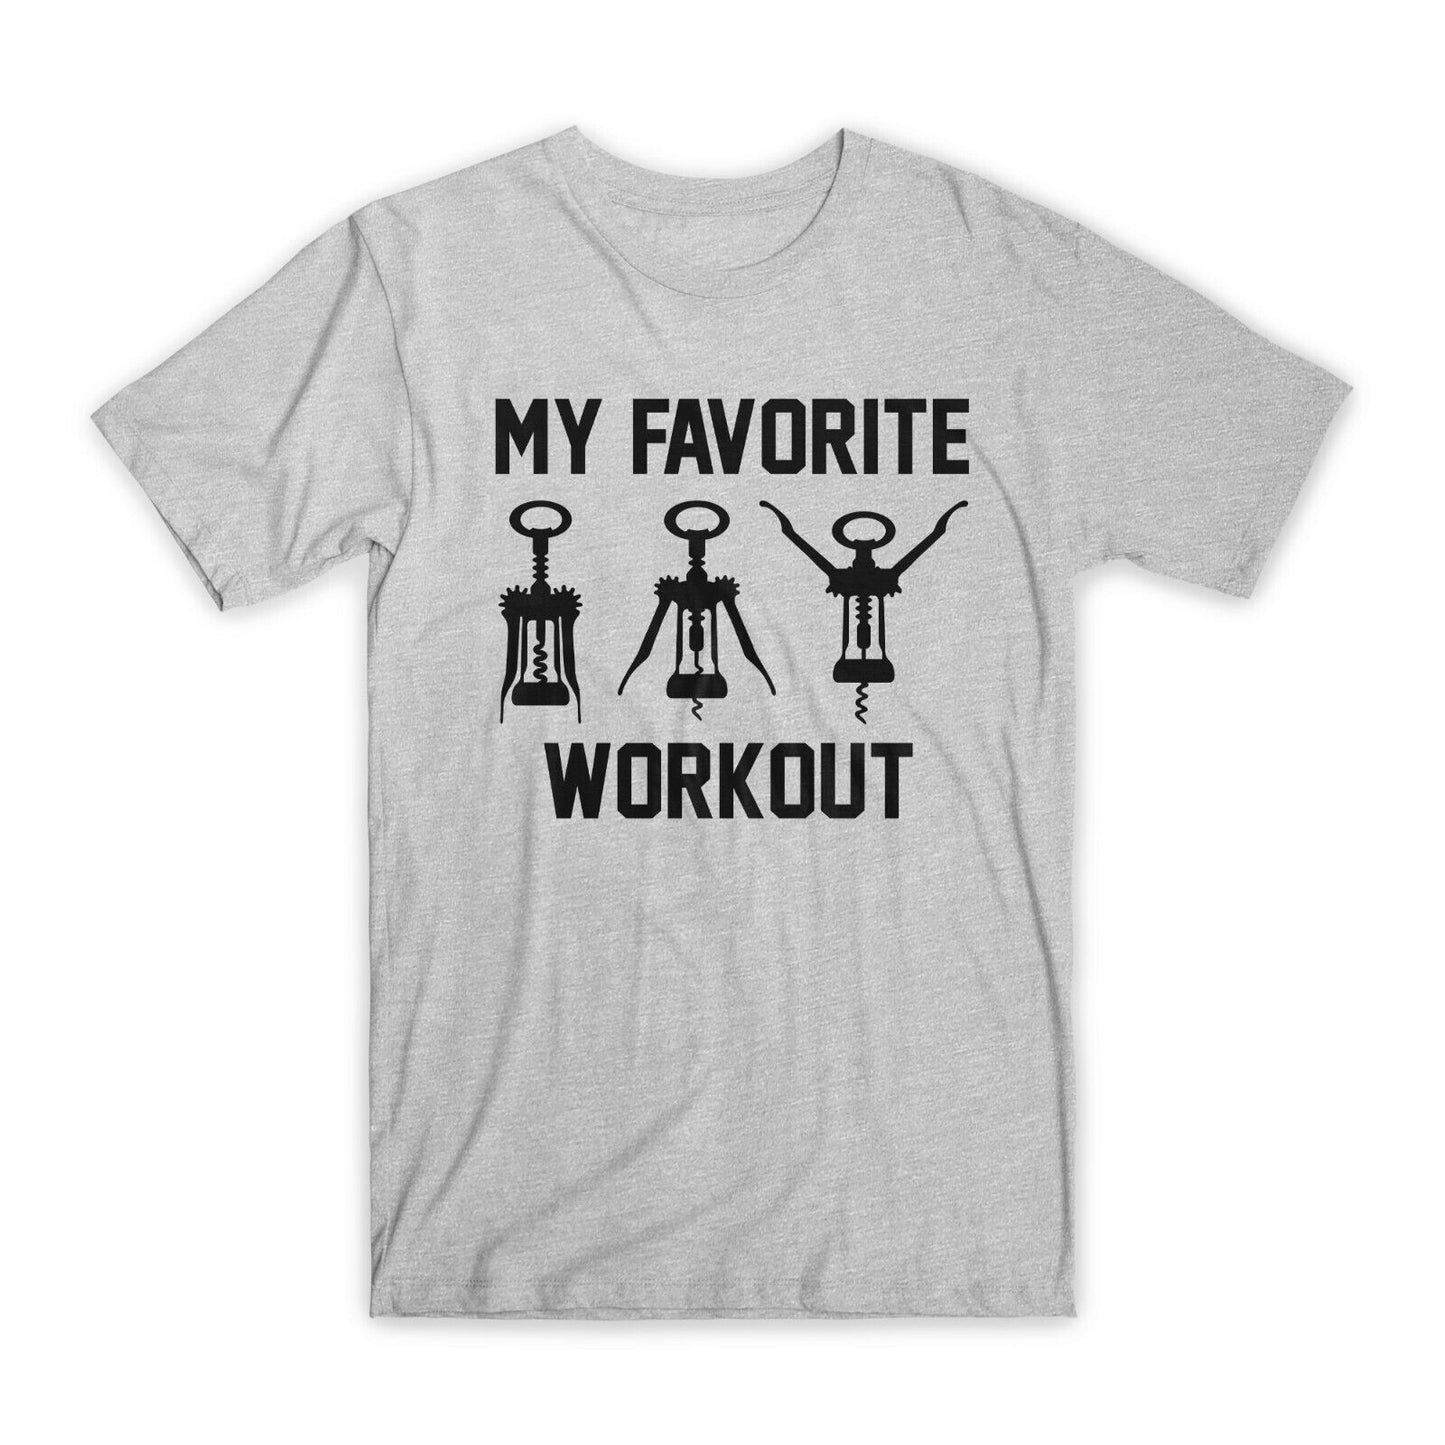 My Favorite Workout T-Shirt Premium Soft Cotton Crew Neck Funny Tees Gifts NEW